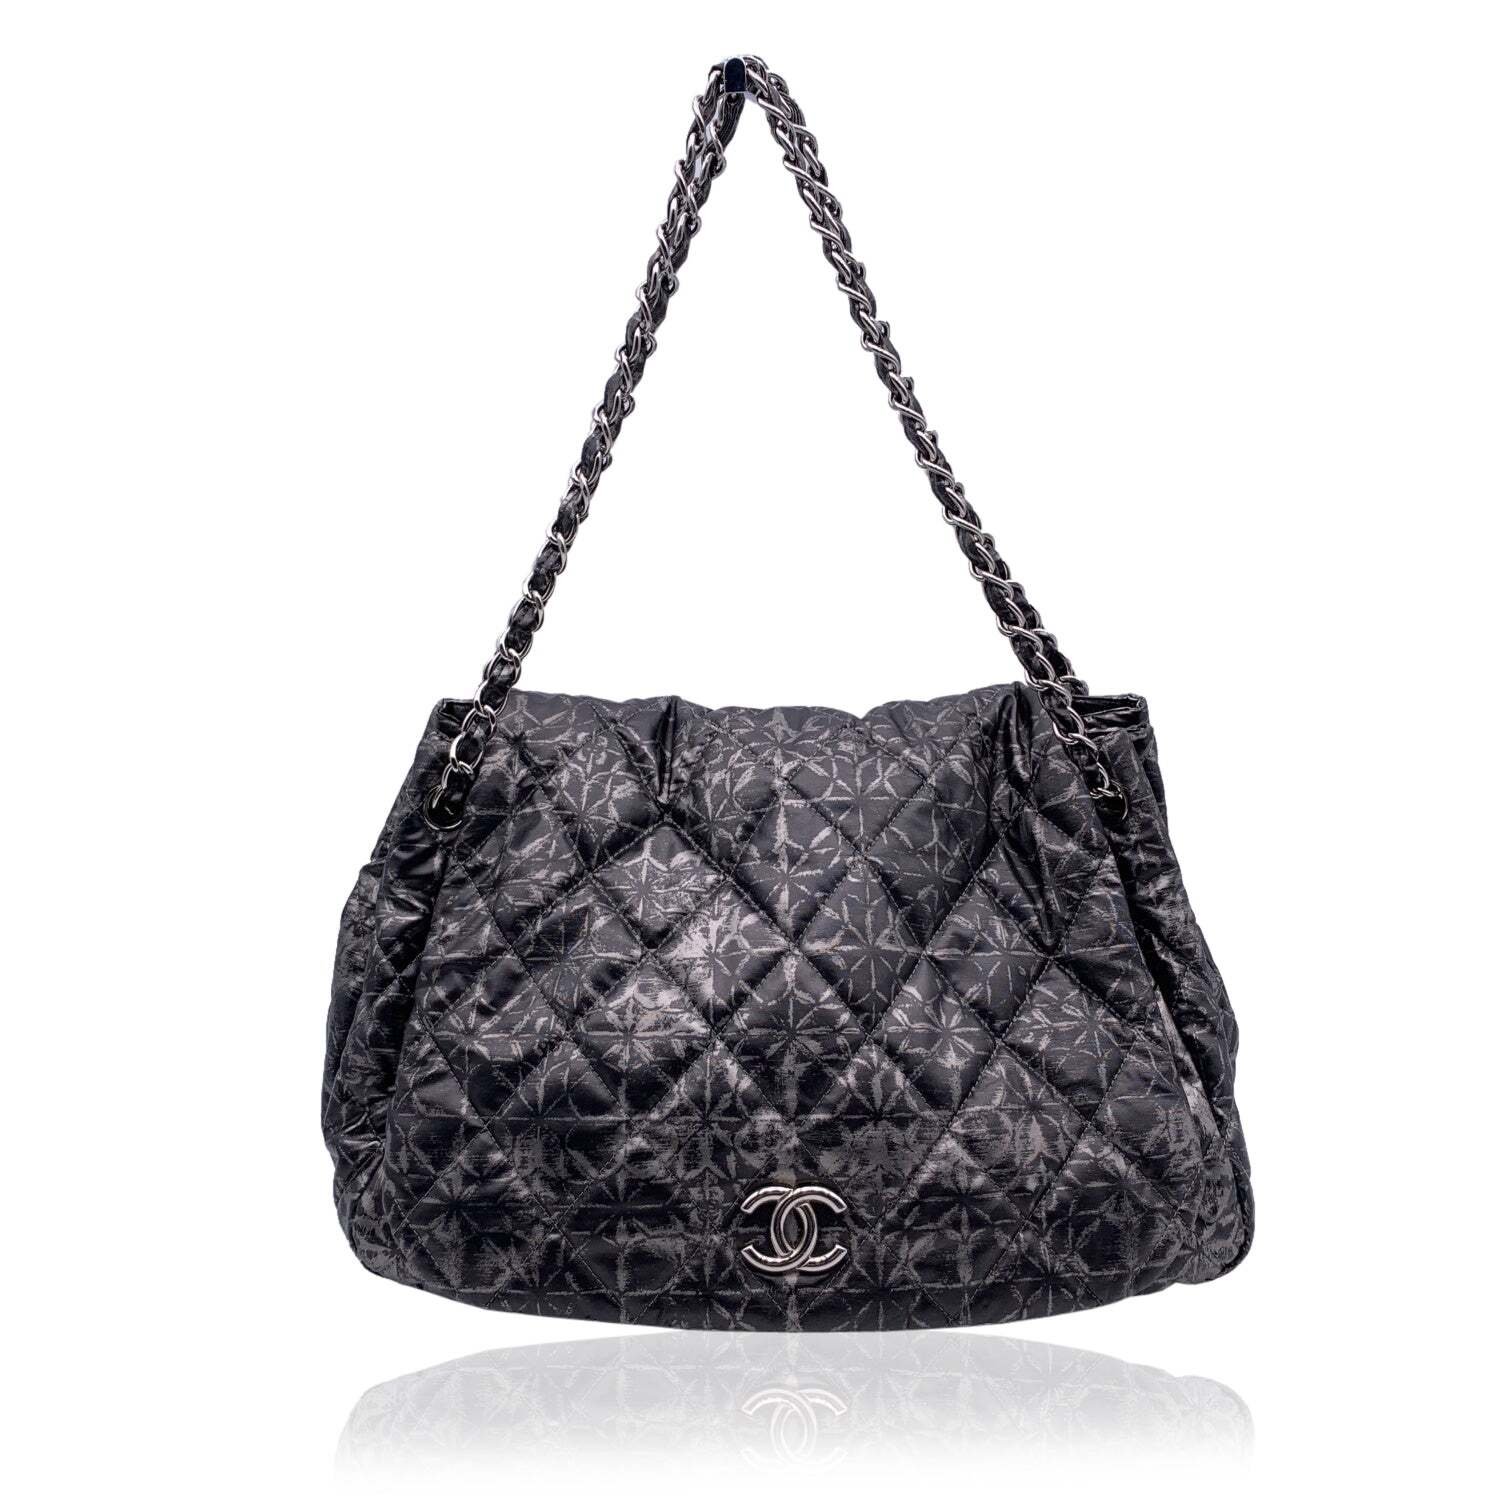 Chanel Moscow Purse Shoulder 2000 's Black Awesome Quilted Chain